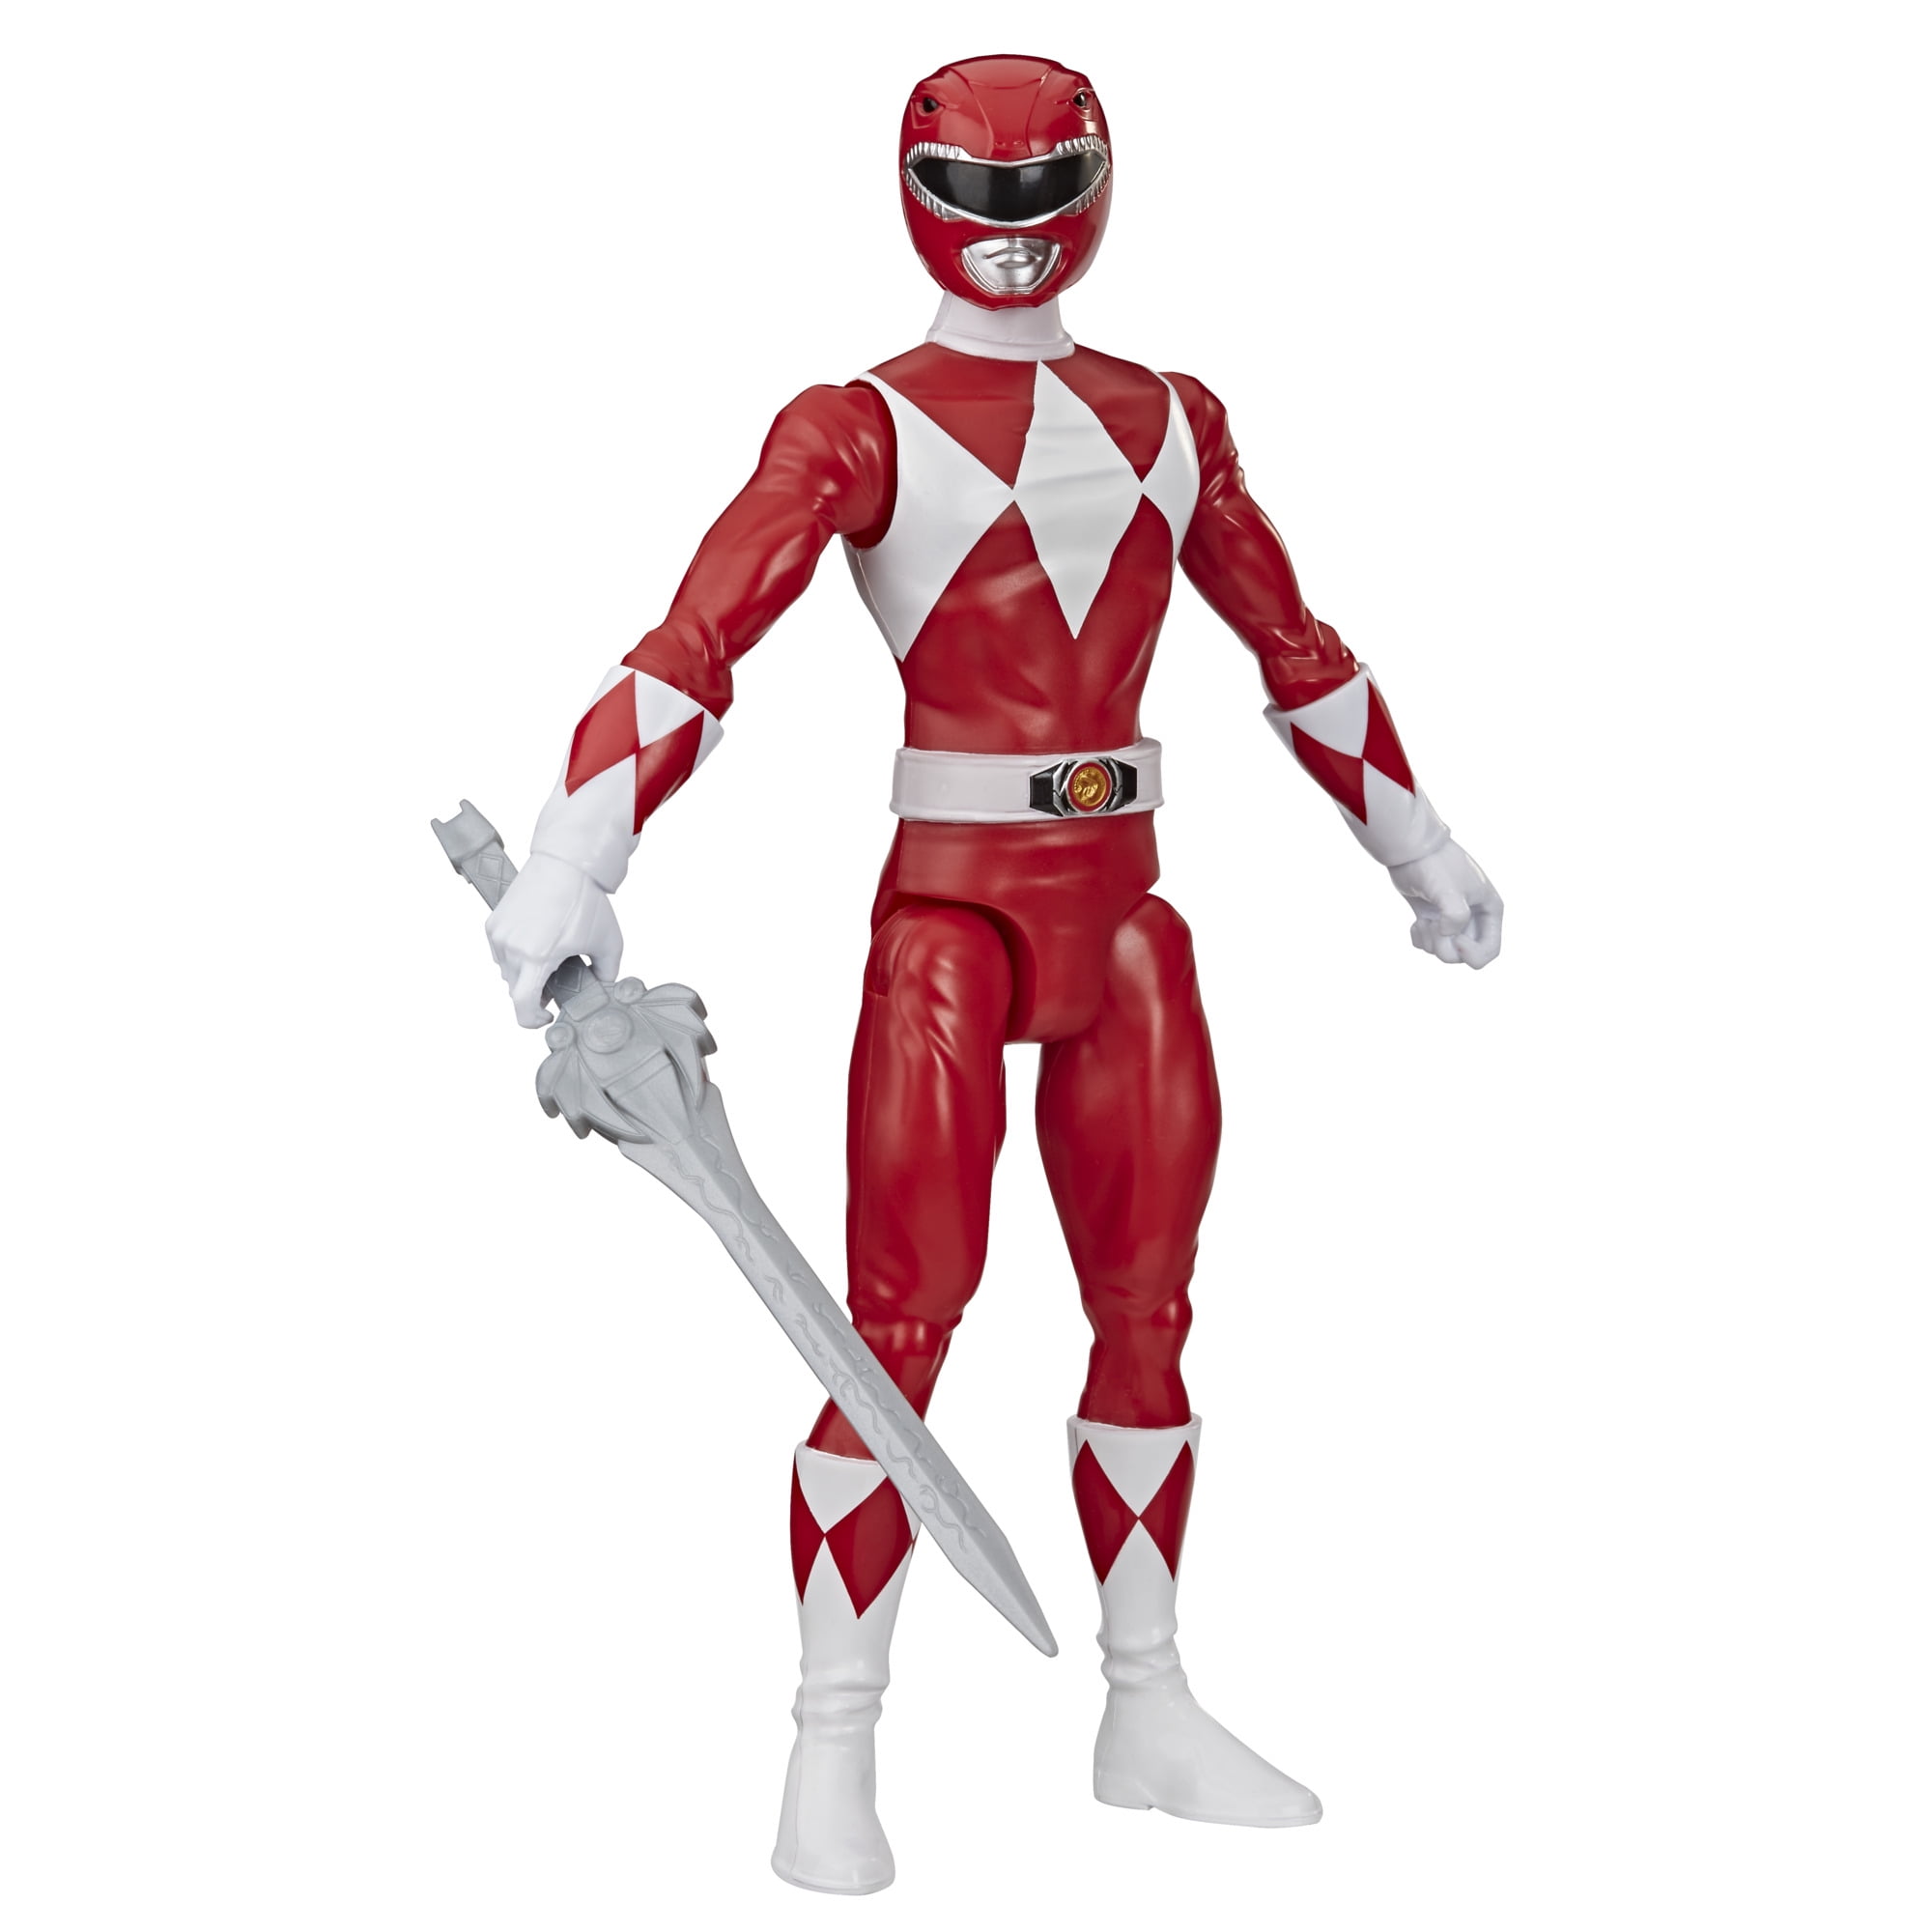 Power Rangers Mighty Morphin Red Ranger Action Figure Toy Hasbro Toys 9" Boxed 